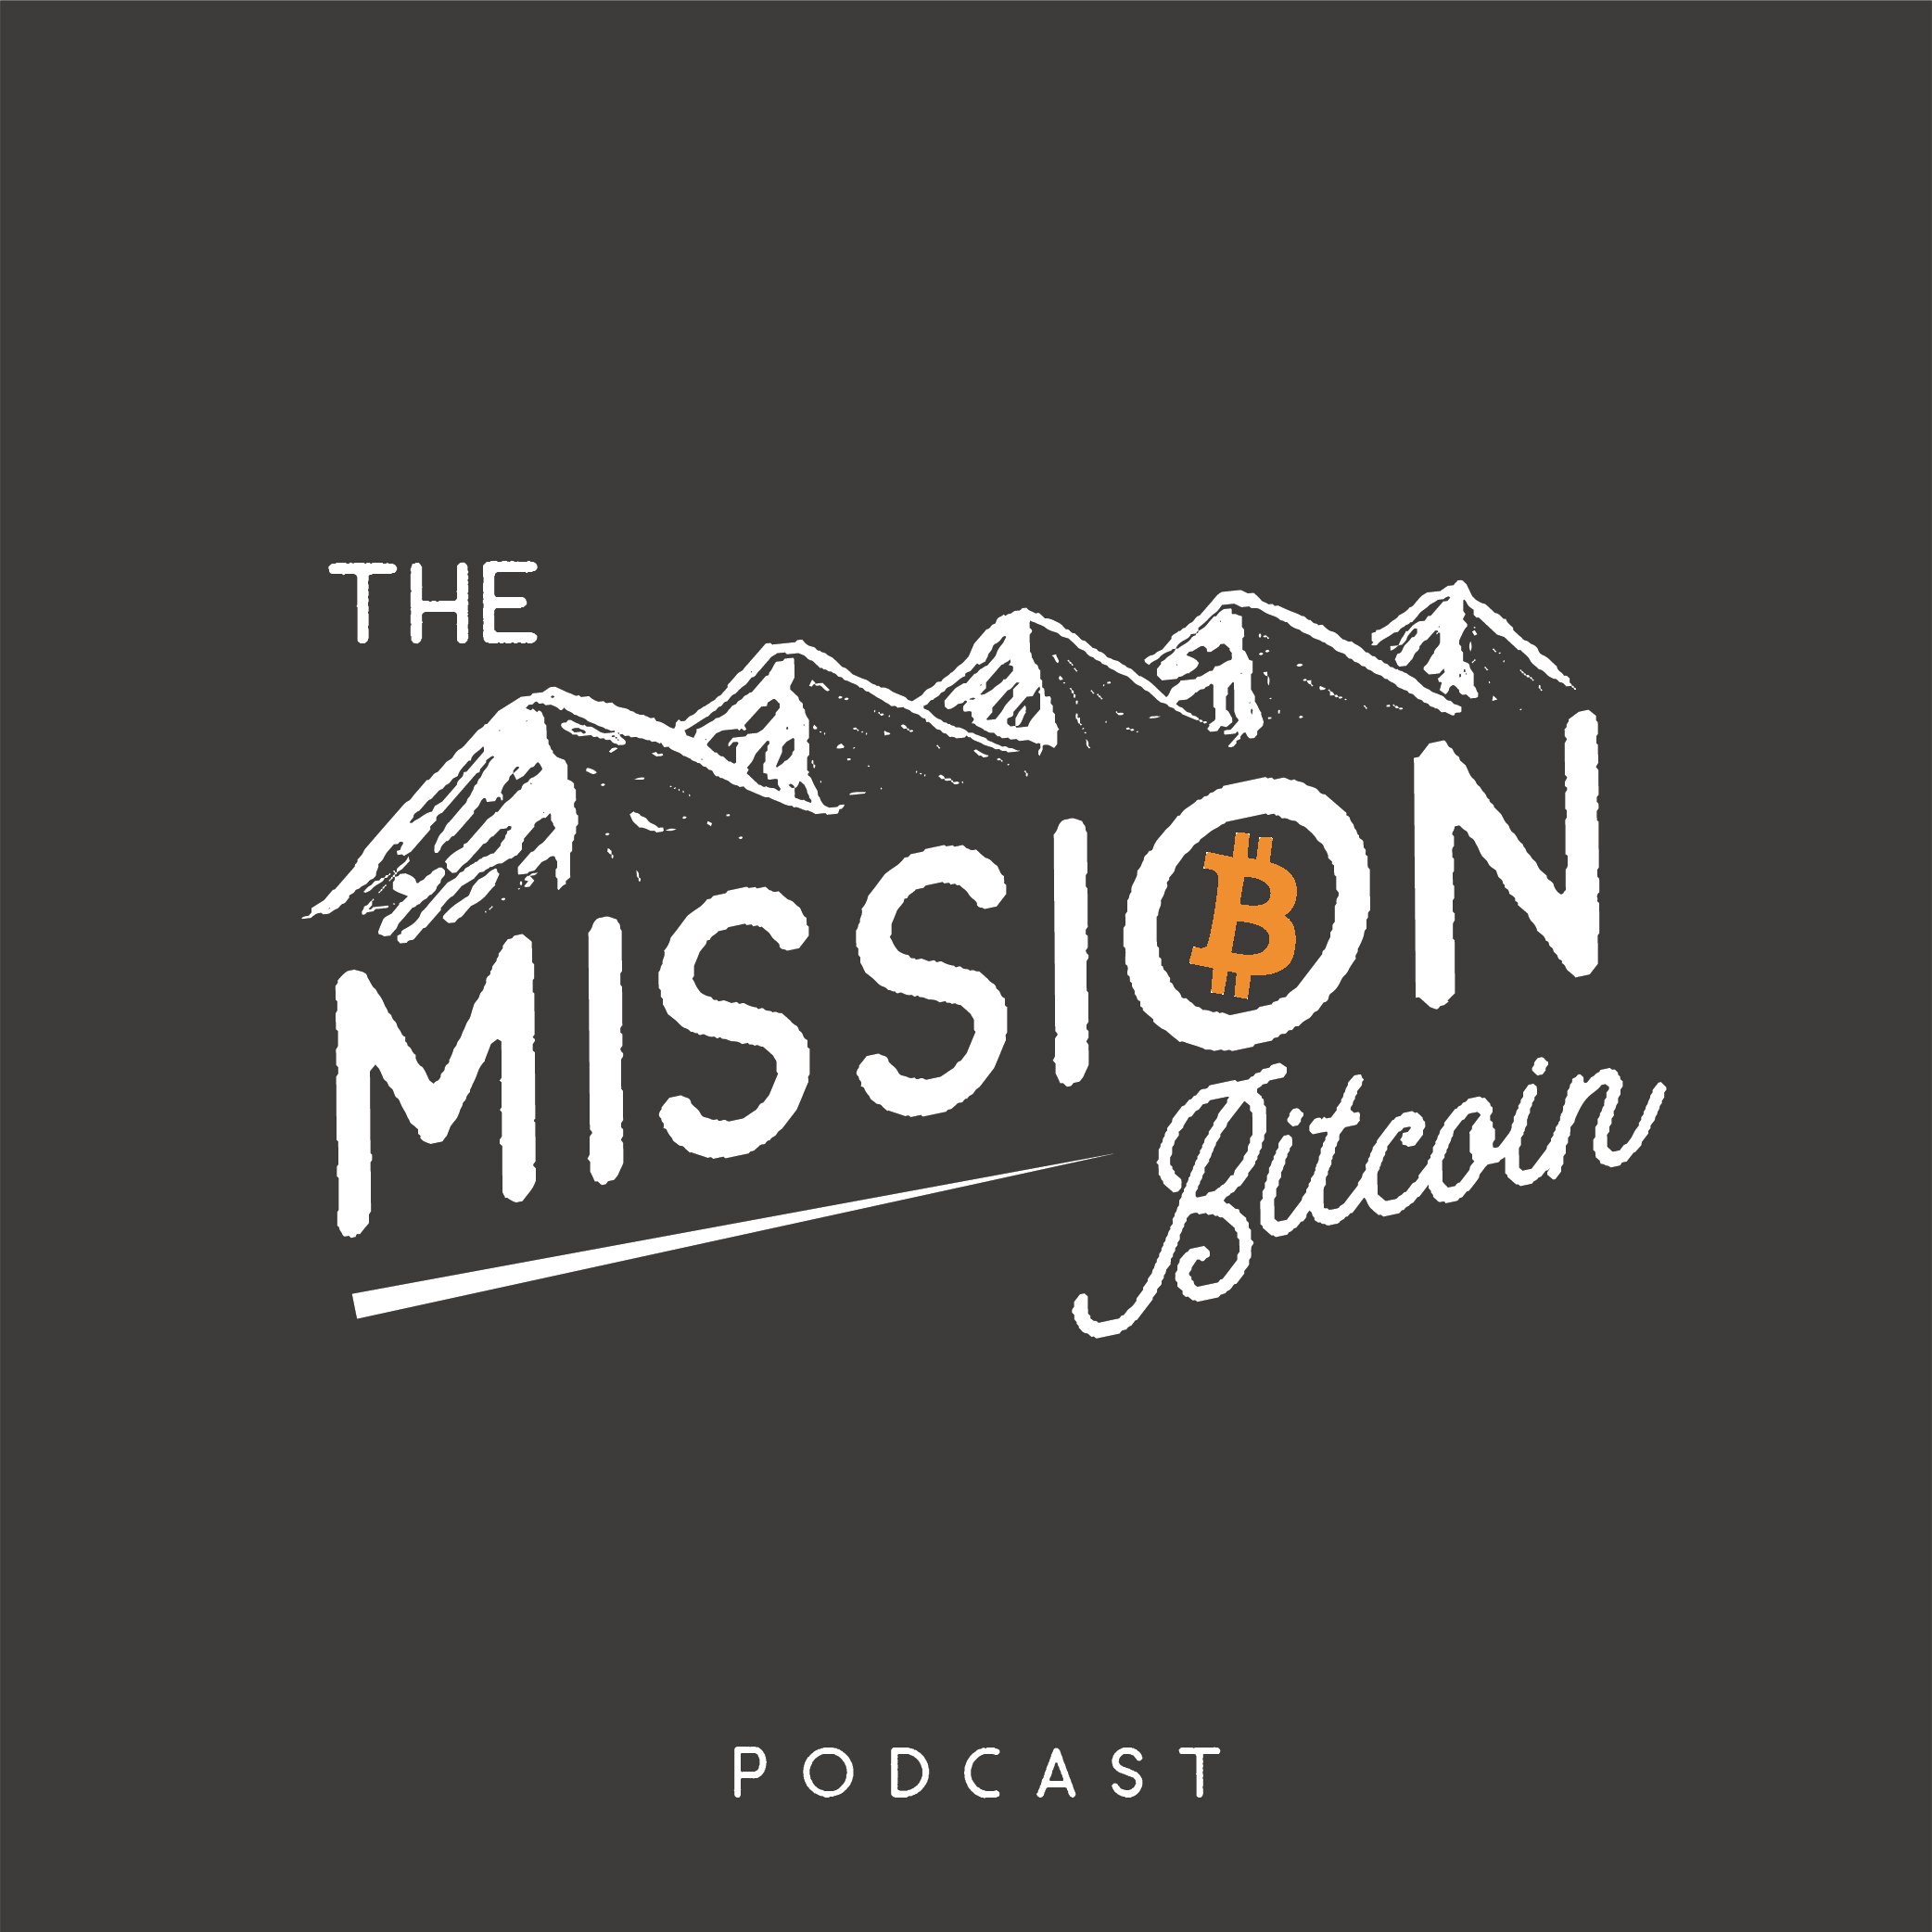 Artwork for podcast Mission Bitcoin